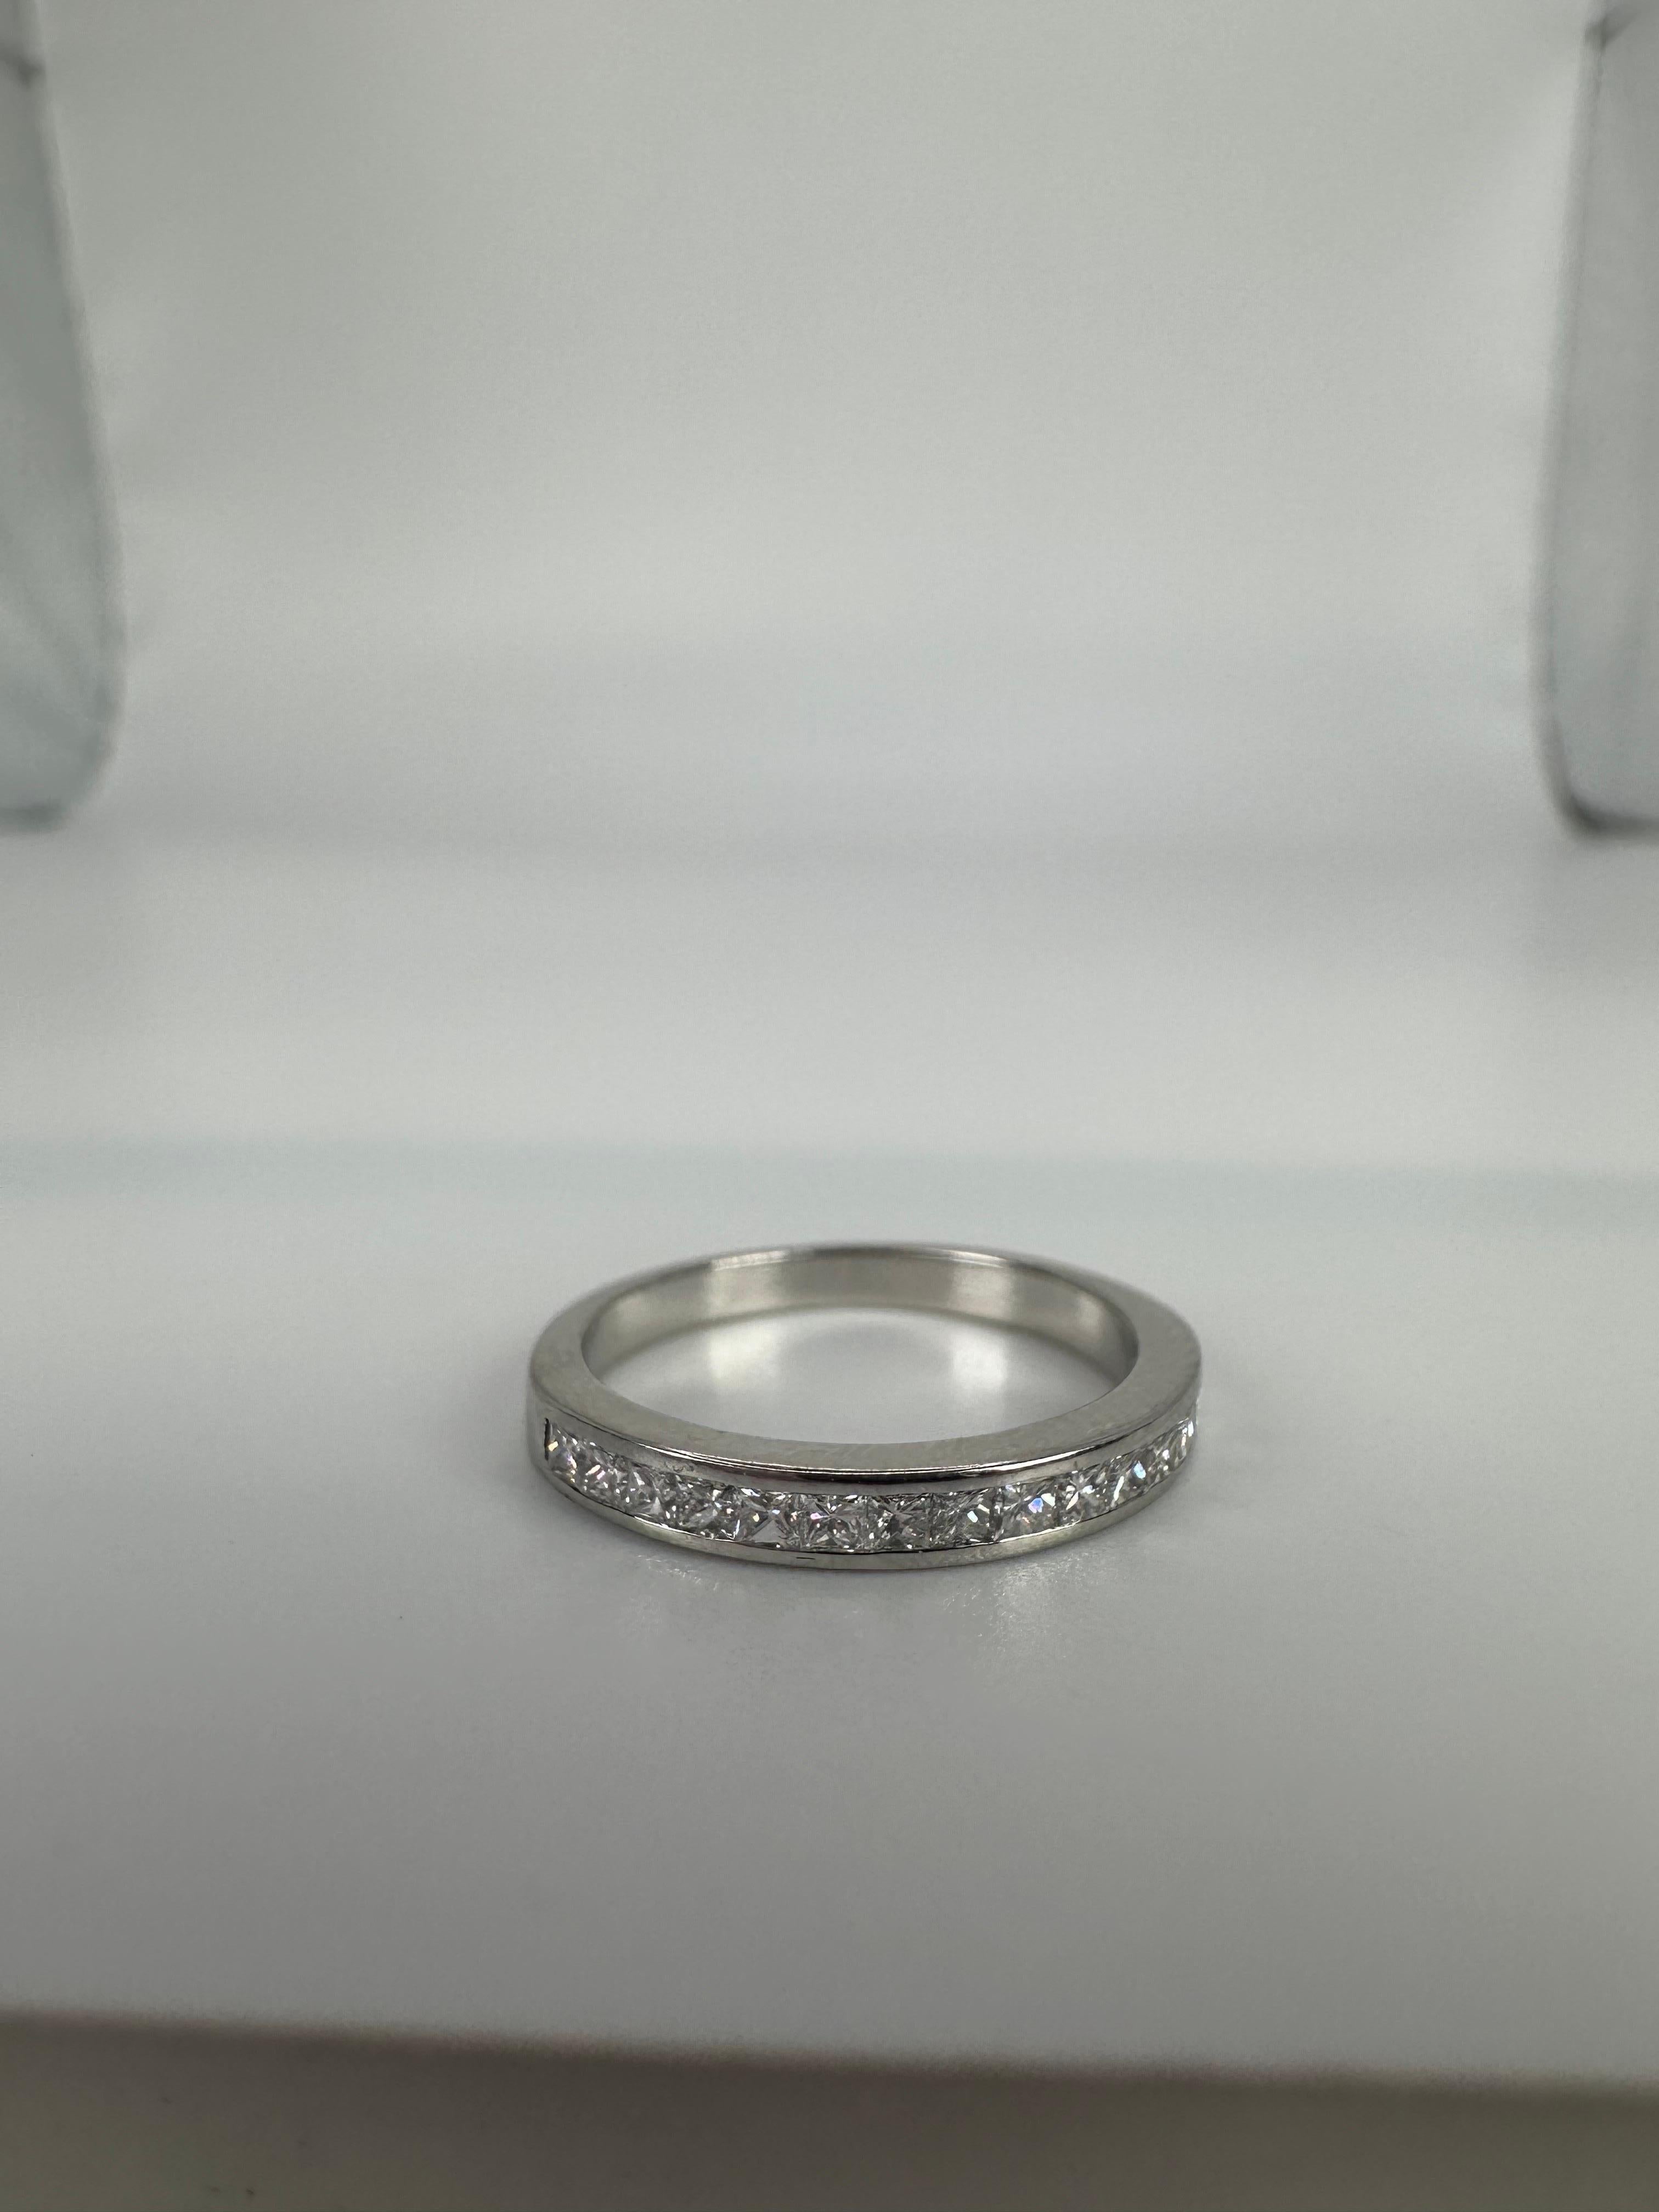 Princess cut diamond wedding band in 14KT white gold, stunning classical beauty!
GOLD: 14KT gold
NATURAL DIAMOND(S)
Clarity/Color: SI/H
Carat:0.41ct
Cut:Round Brilliant
Grams:2
size: 5.5
Item#: 110-00006ett

WHAT YOU GET AT STAMPAR JEWELERS:
Stampar